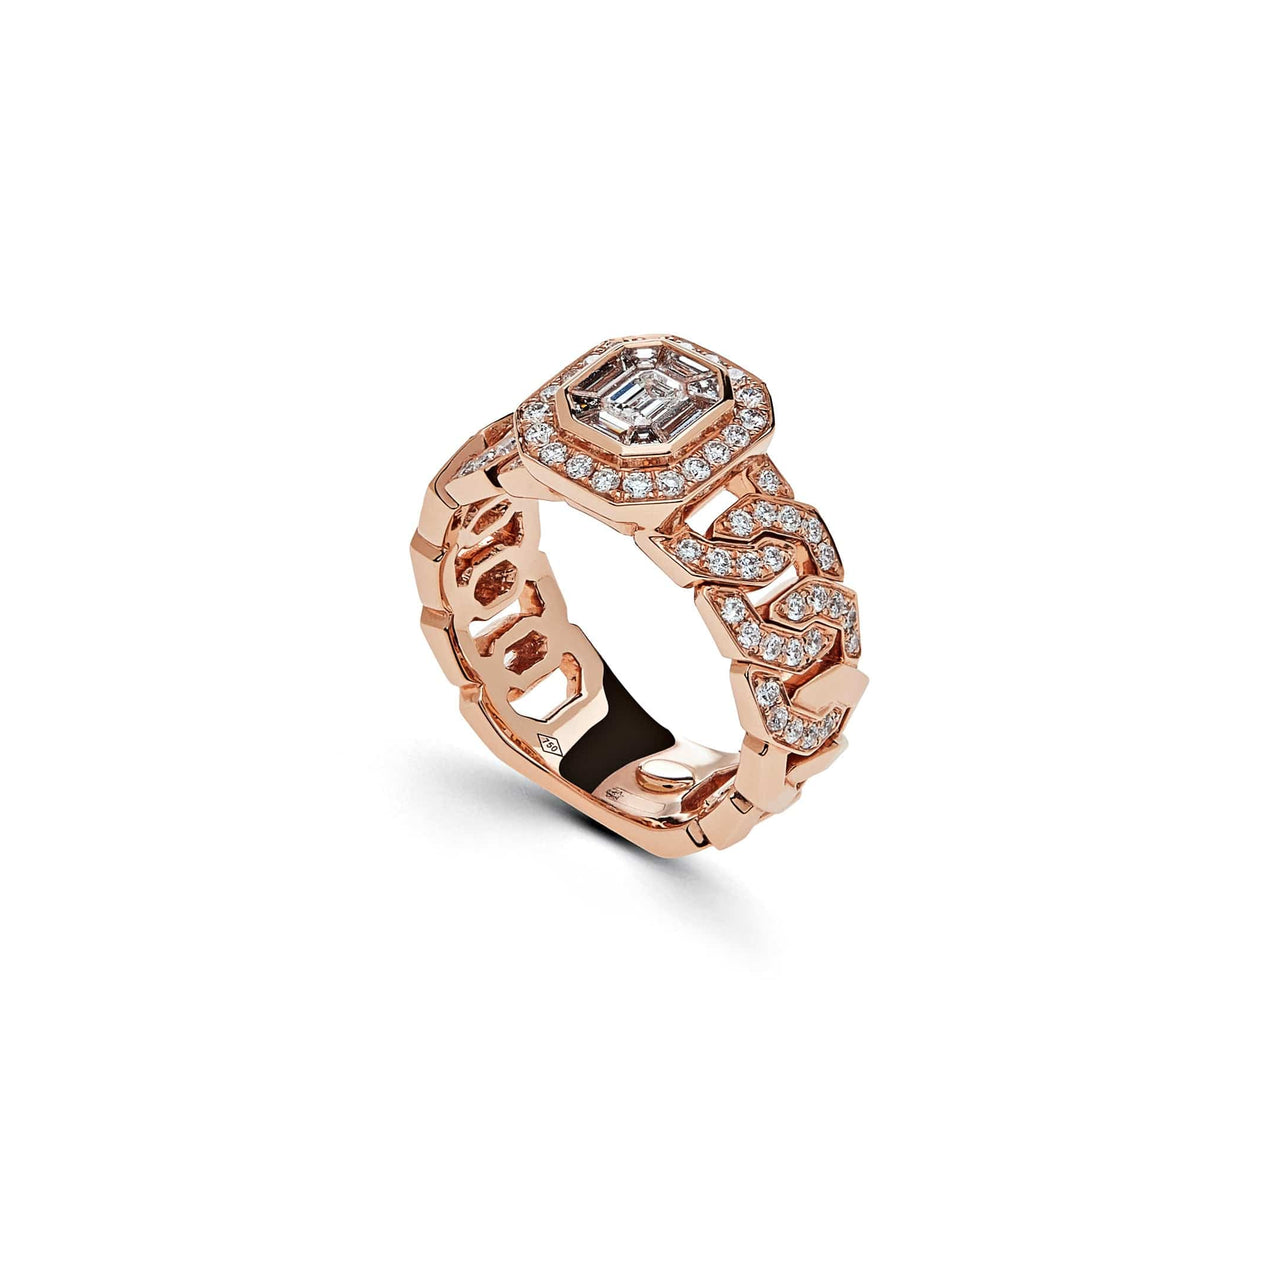 Rose Gold Diamond Cocktail Ring with Pave Chain Link Band Wrist Aficionado